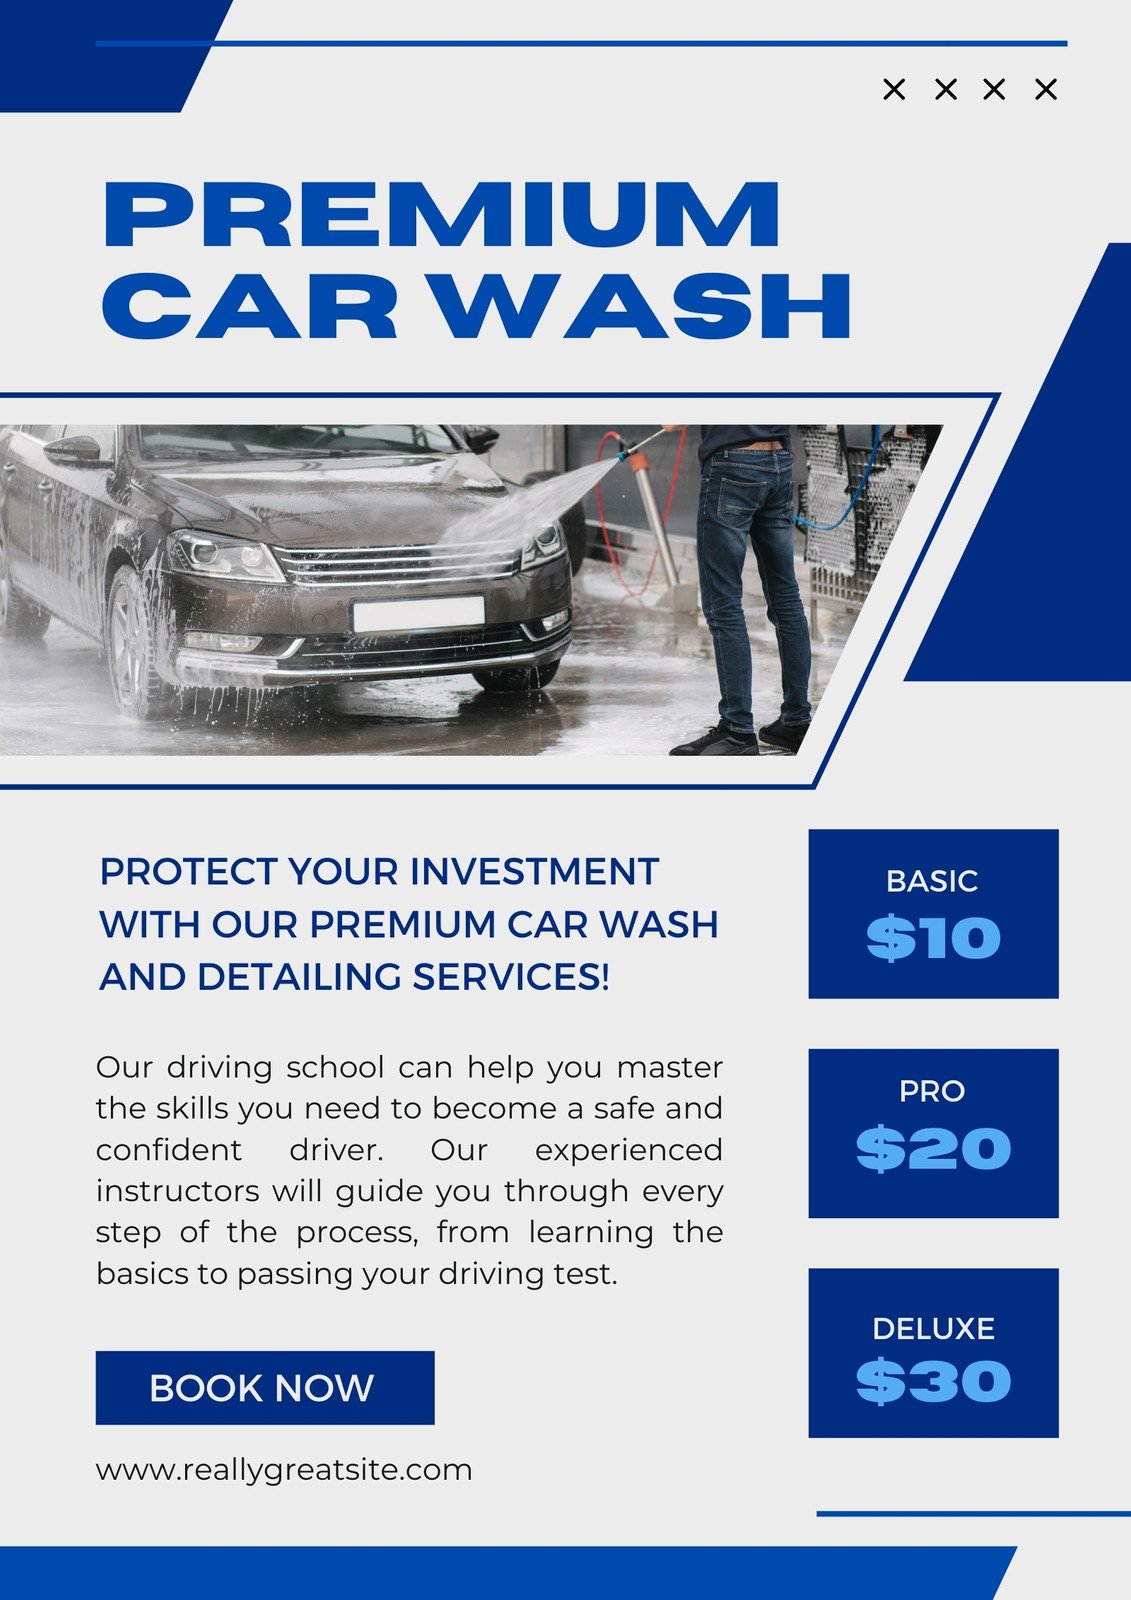 How Much Can a Mobile Car Washing Business Make?